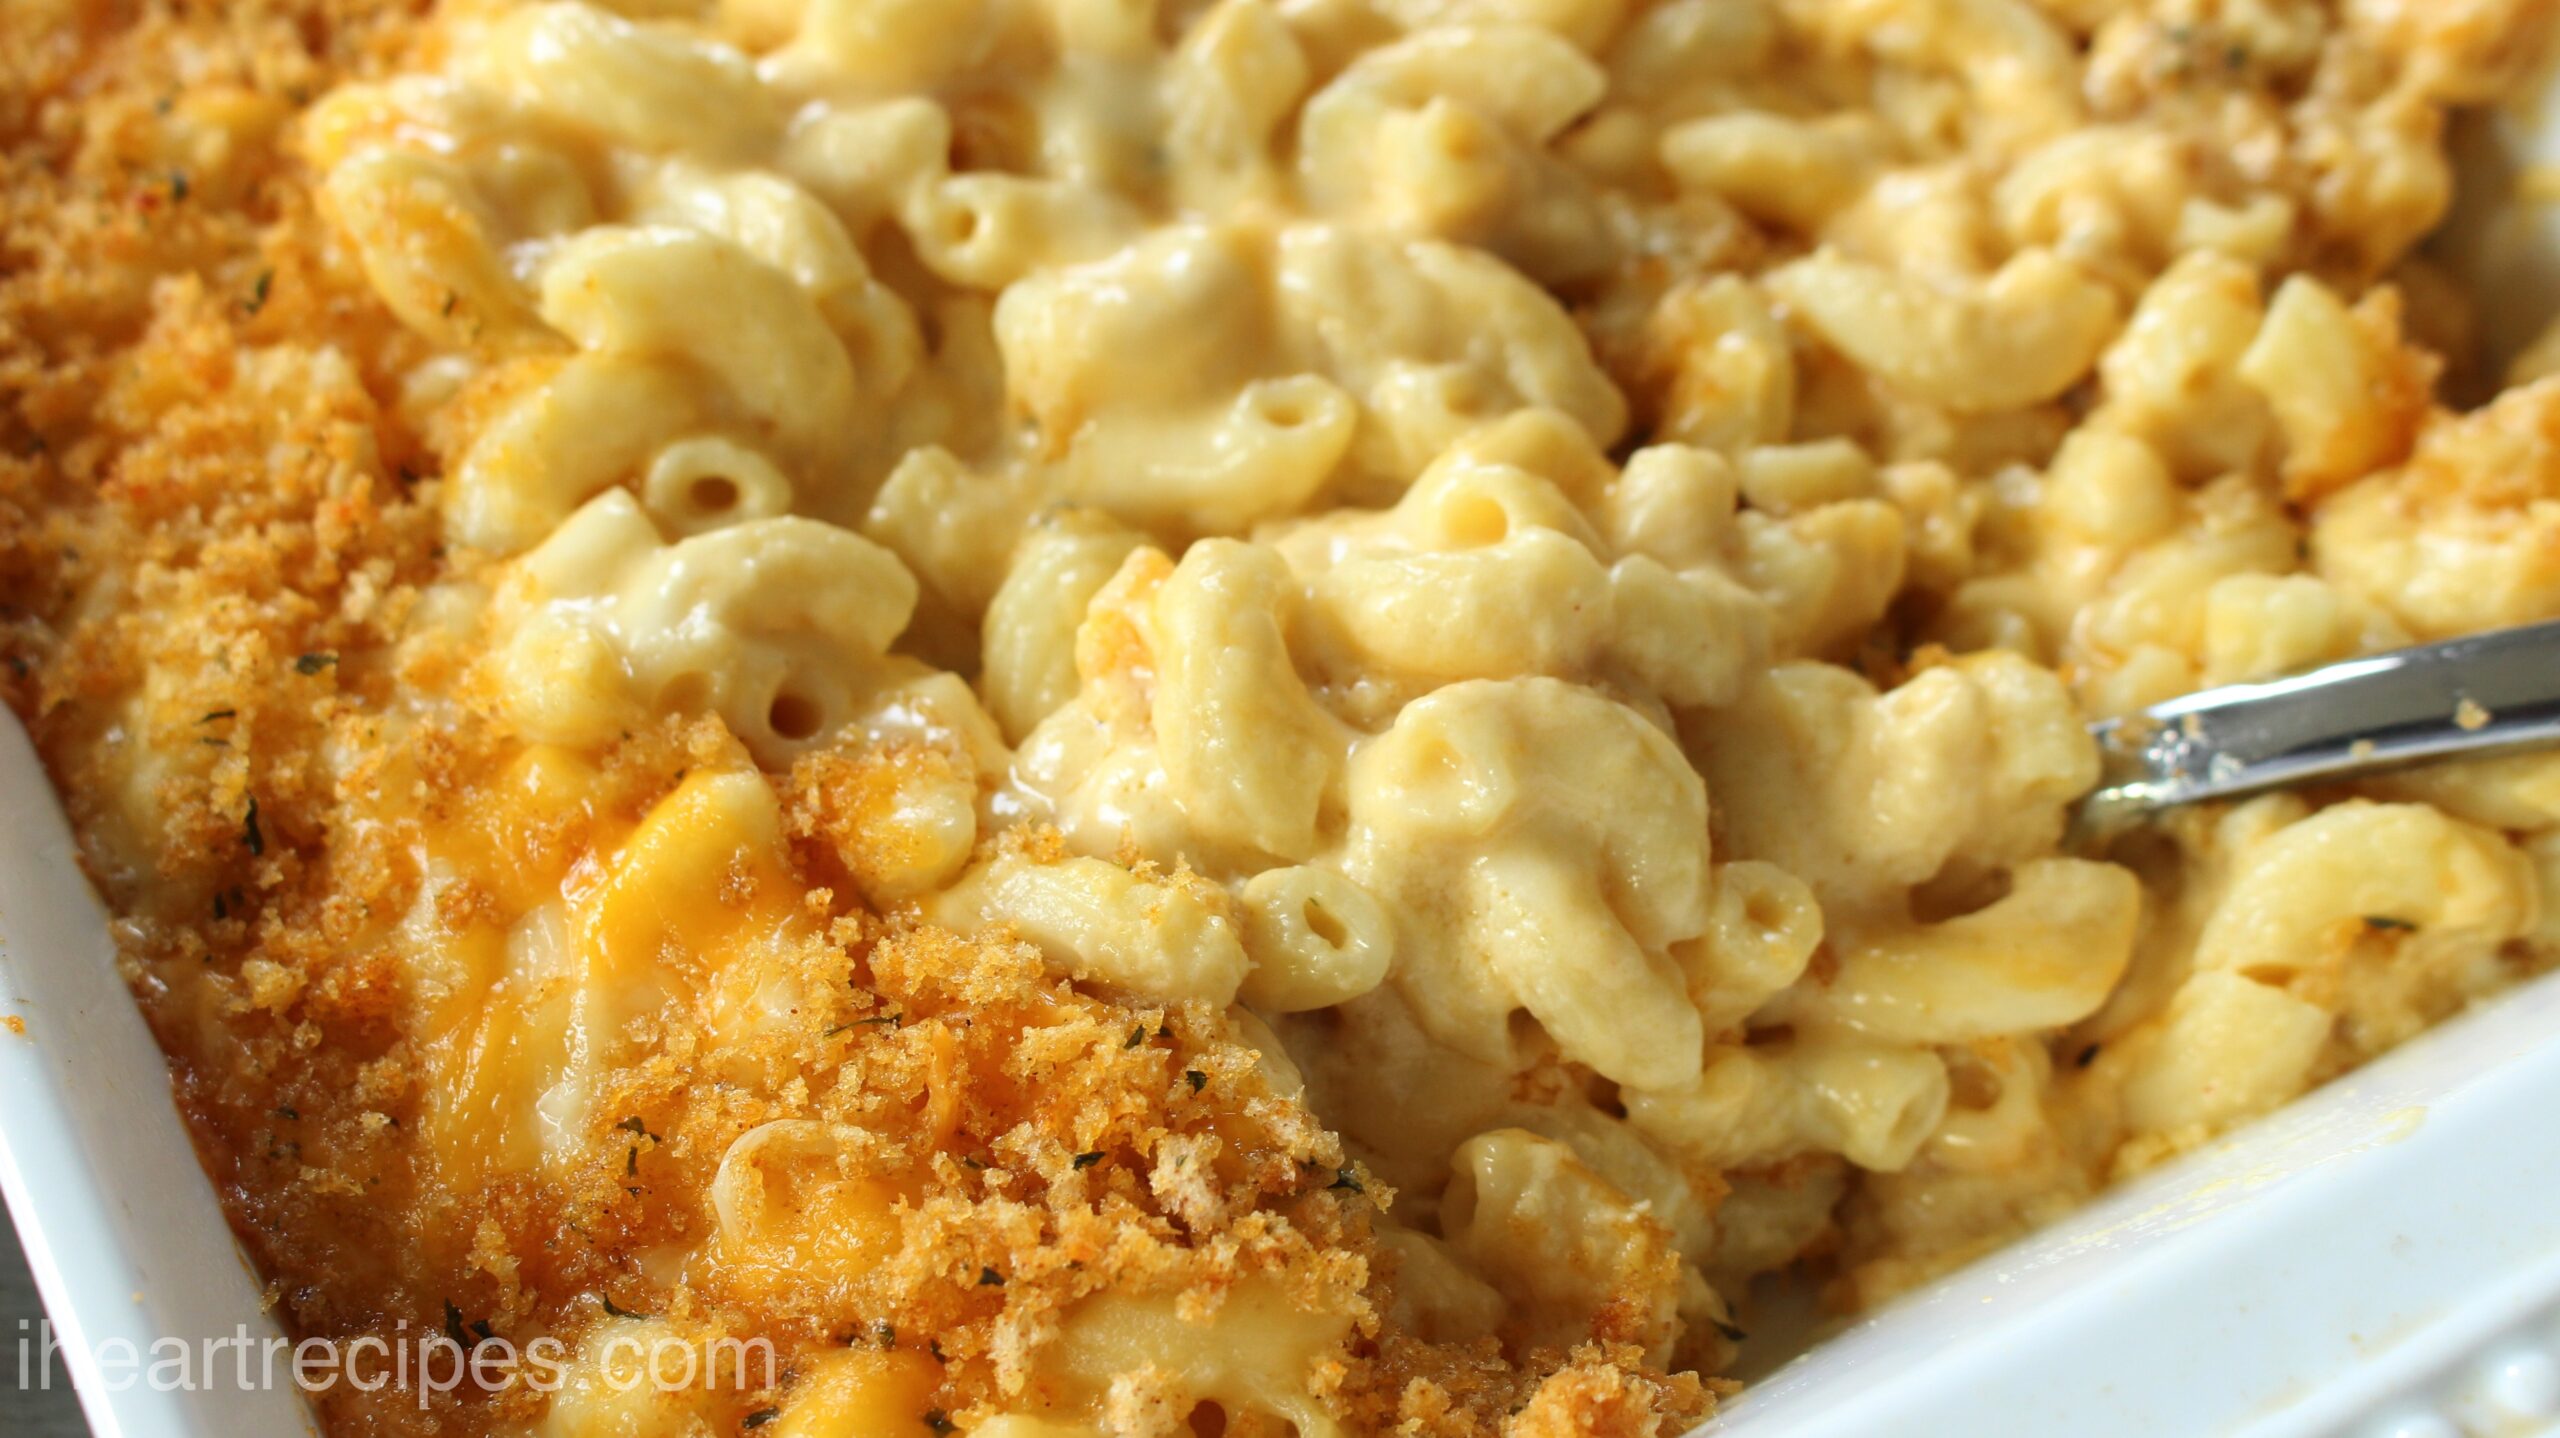 A close-up image of a white casserole dish filled with creamy baked mac and cheese casserole topped with breadcrumbs.